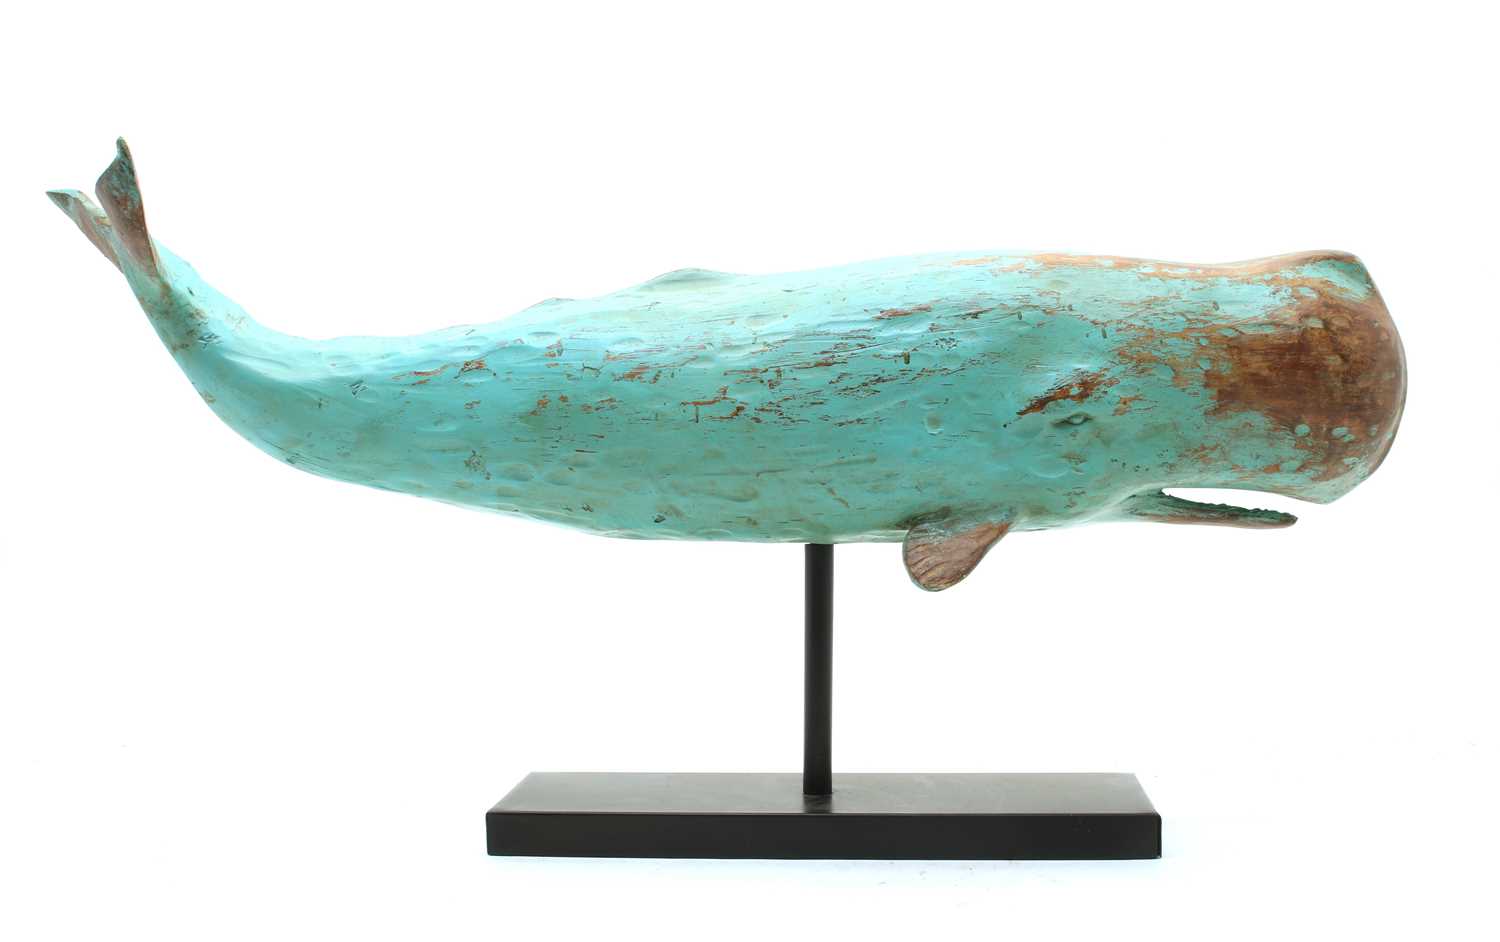 Lot 106 - A painted model of a sperm whale